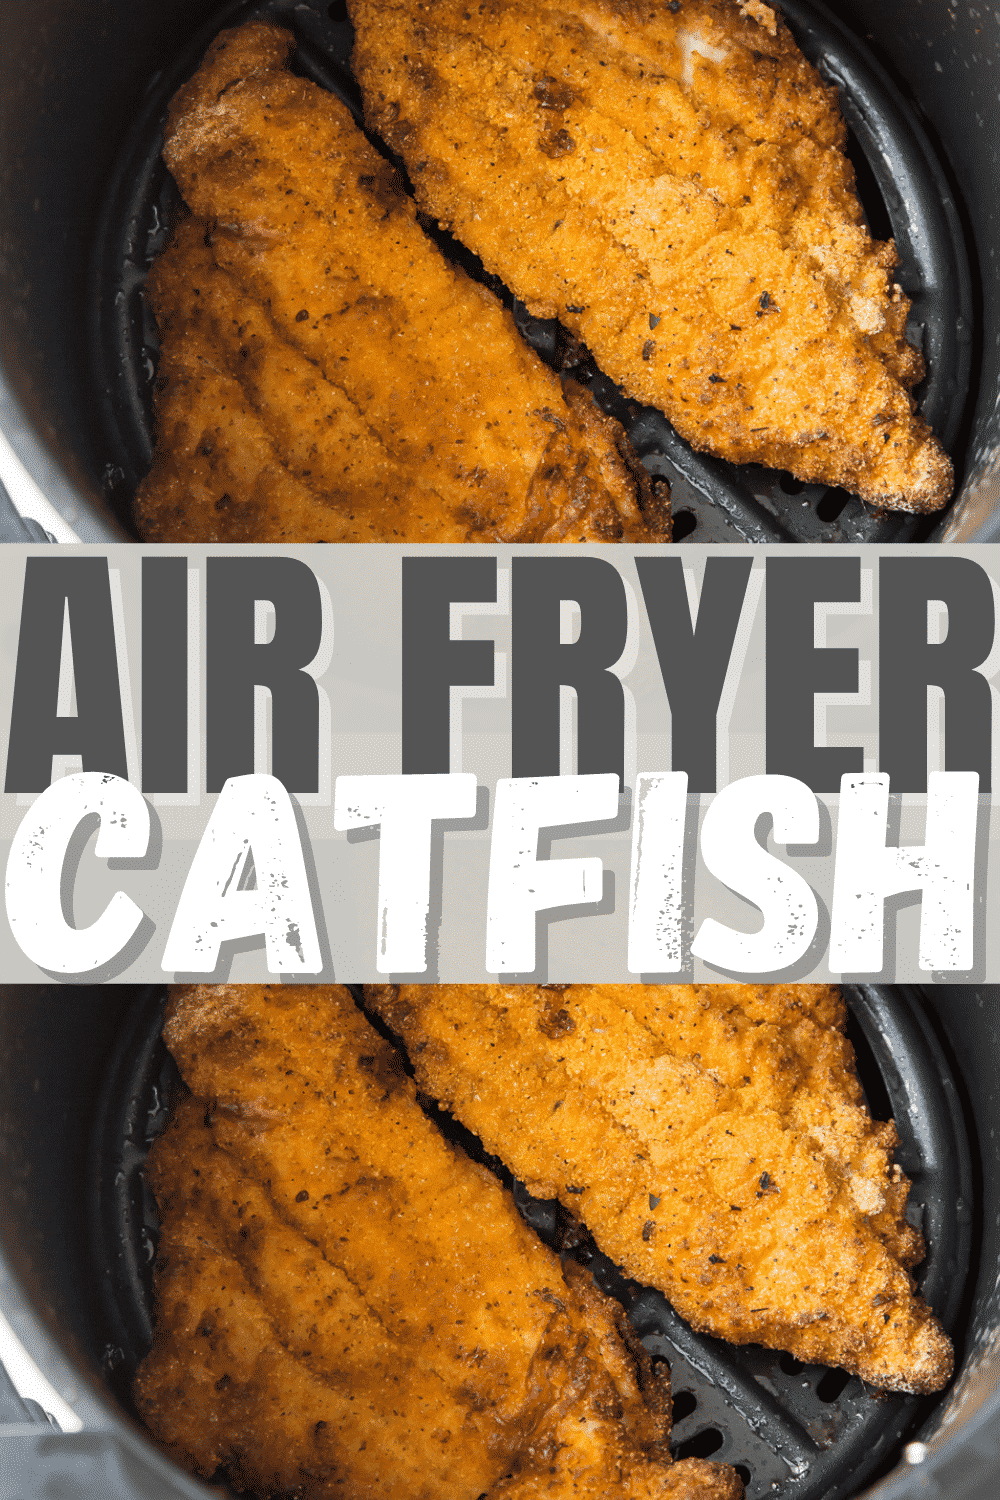 Air Fryer Catfish is the crispiest white fish without all the hot oil! These crunchy filets are coated in seasoned cornmeal and marinated in buttermilk for the best flaky fish in a flash. #airfryercatfish #airfryerfish via @vegetarianmamma